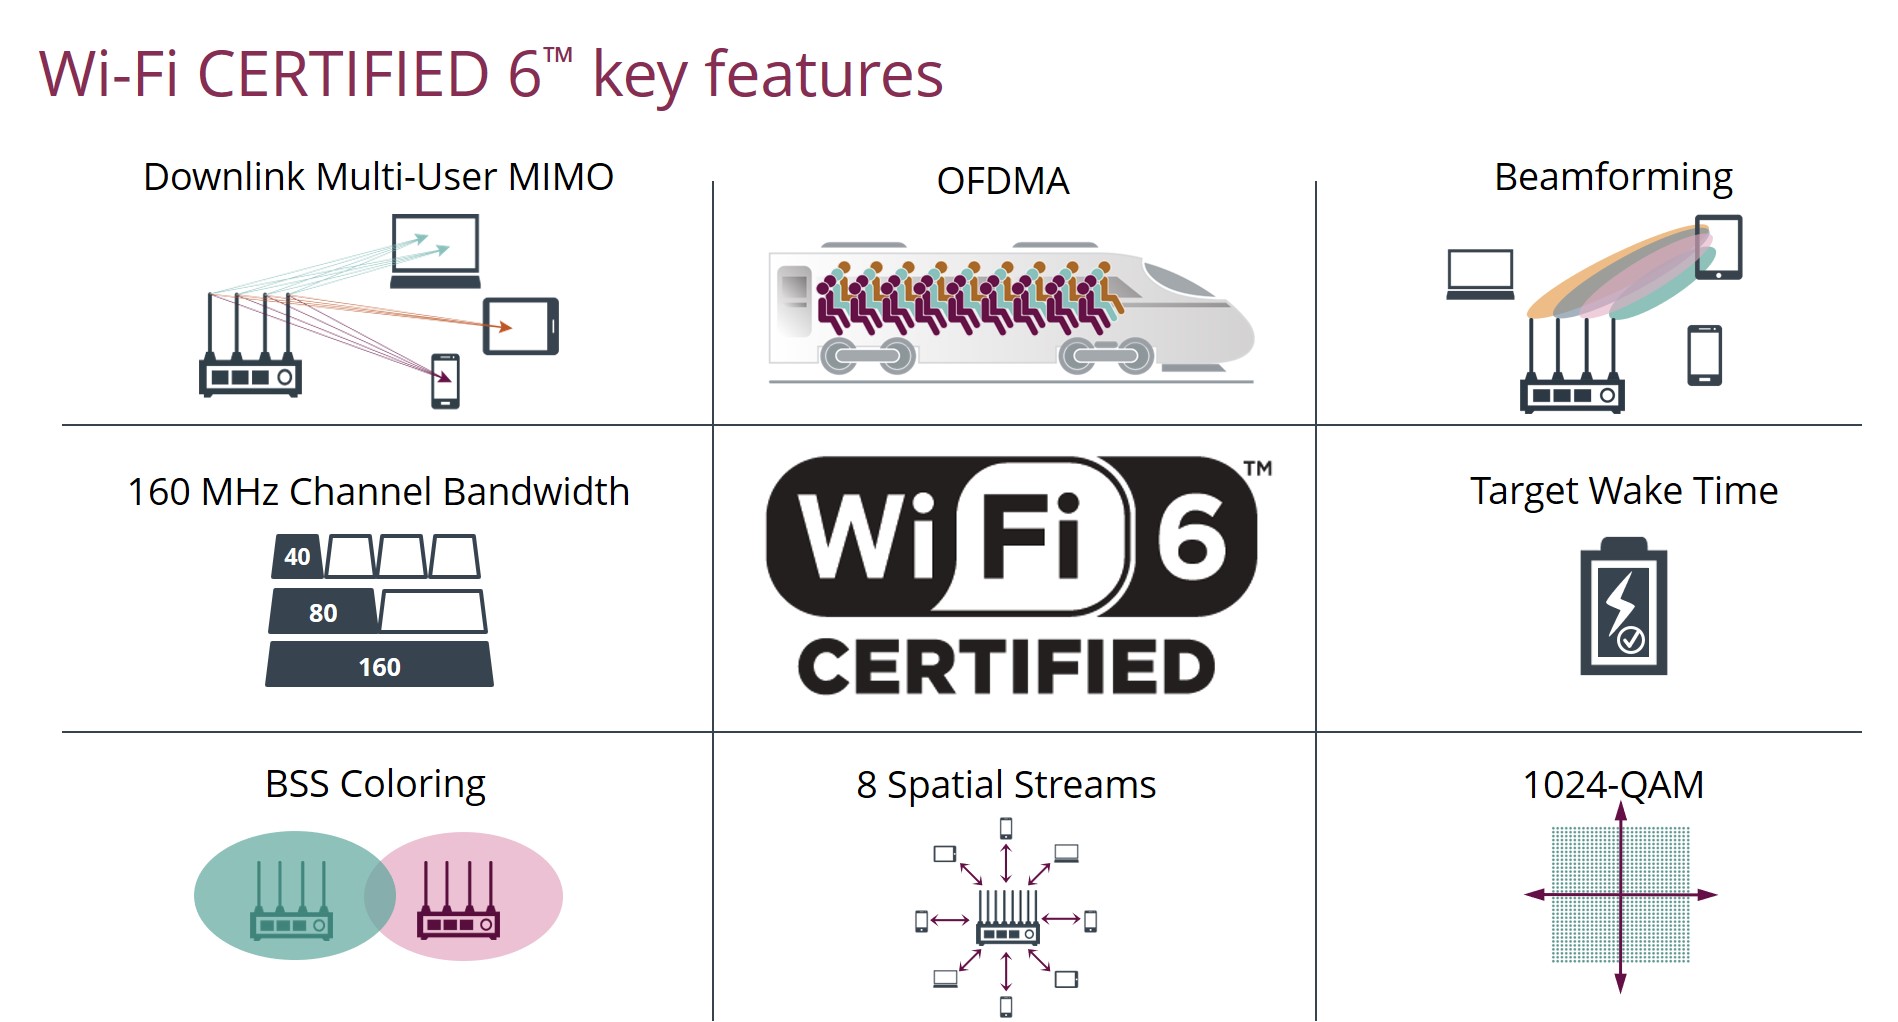  Wi-Fi 6 certified image showing the advantages of using Wi-Fi that requires authorization, such as OFDMA, 160 MHz channel bandwidth, and 8 spatial streams.